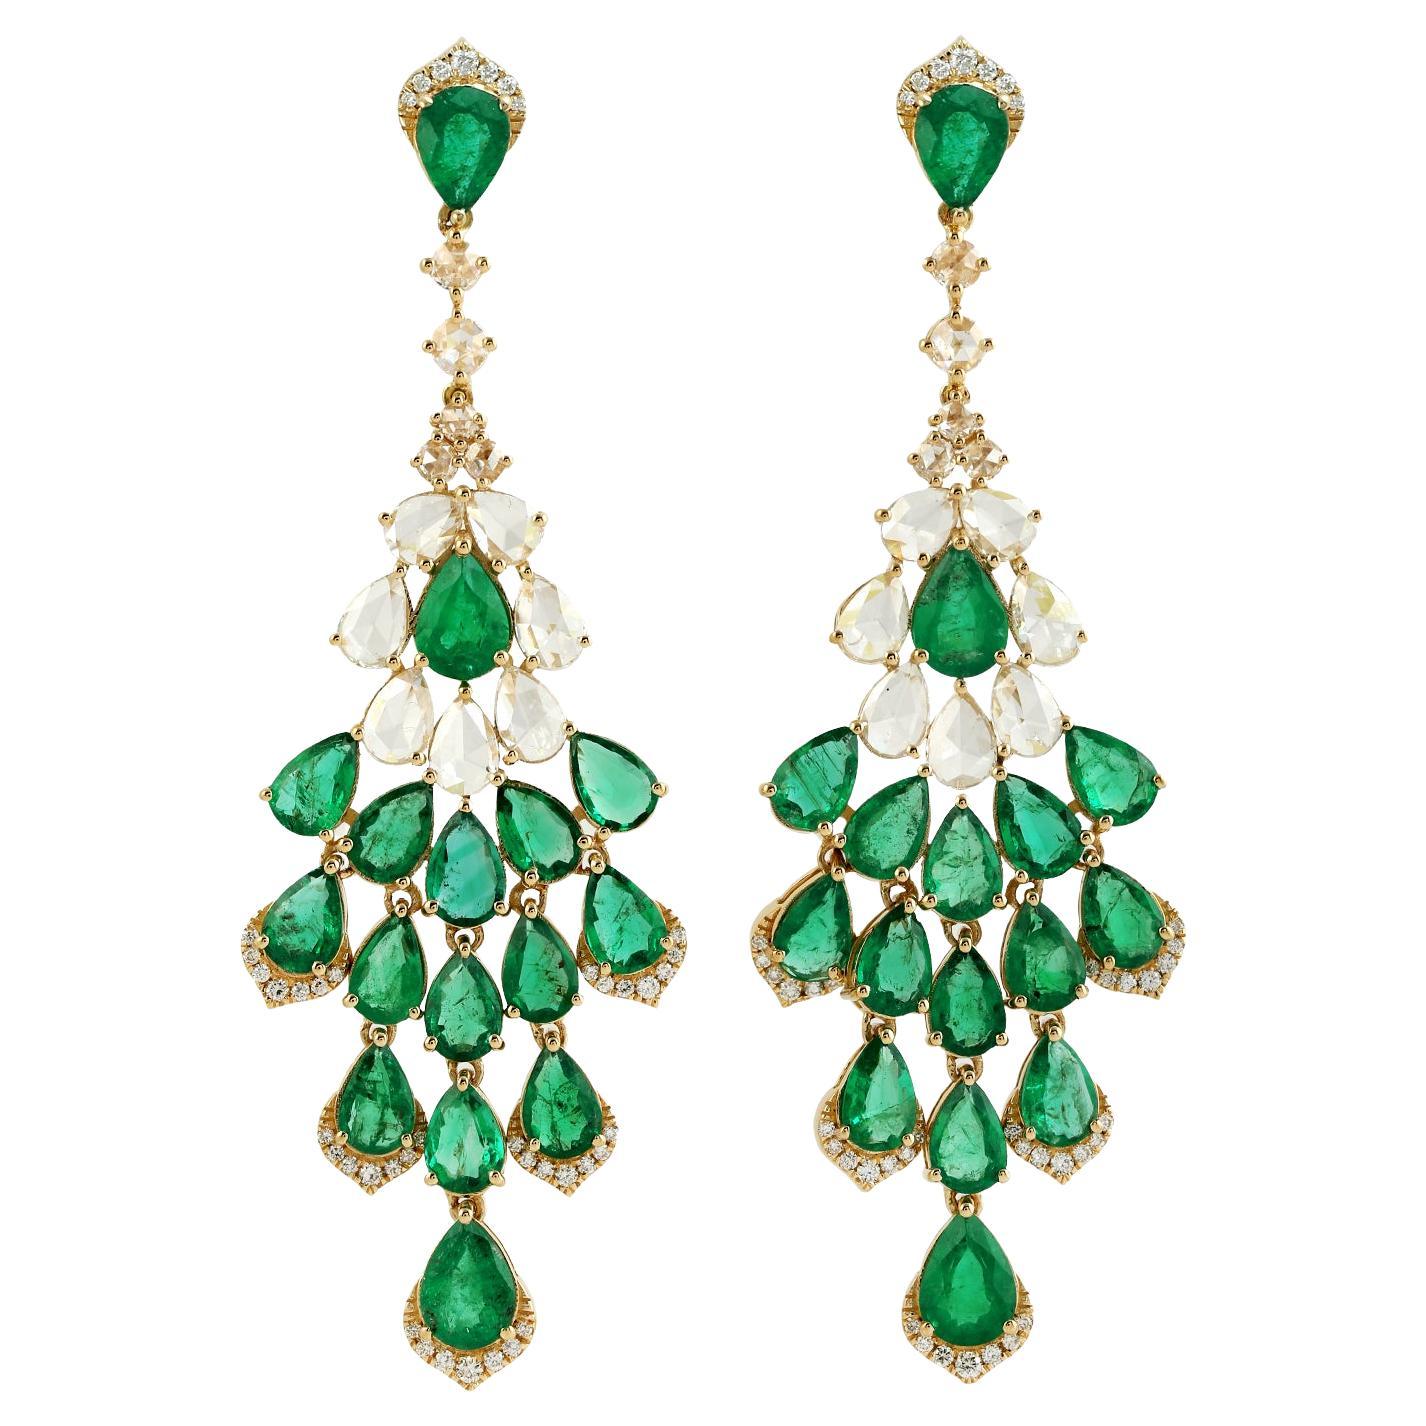 11.34ct Pear Shaped Emerald Dangle Earrings With Diamonds In 18k Yellow Gold